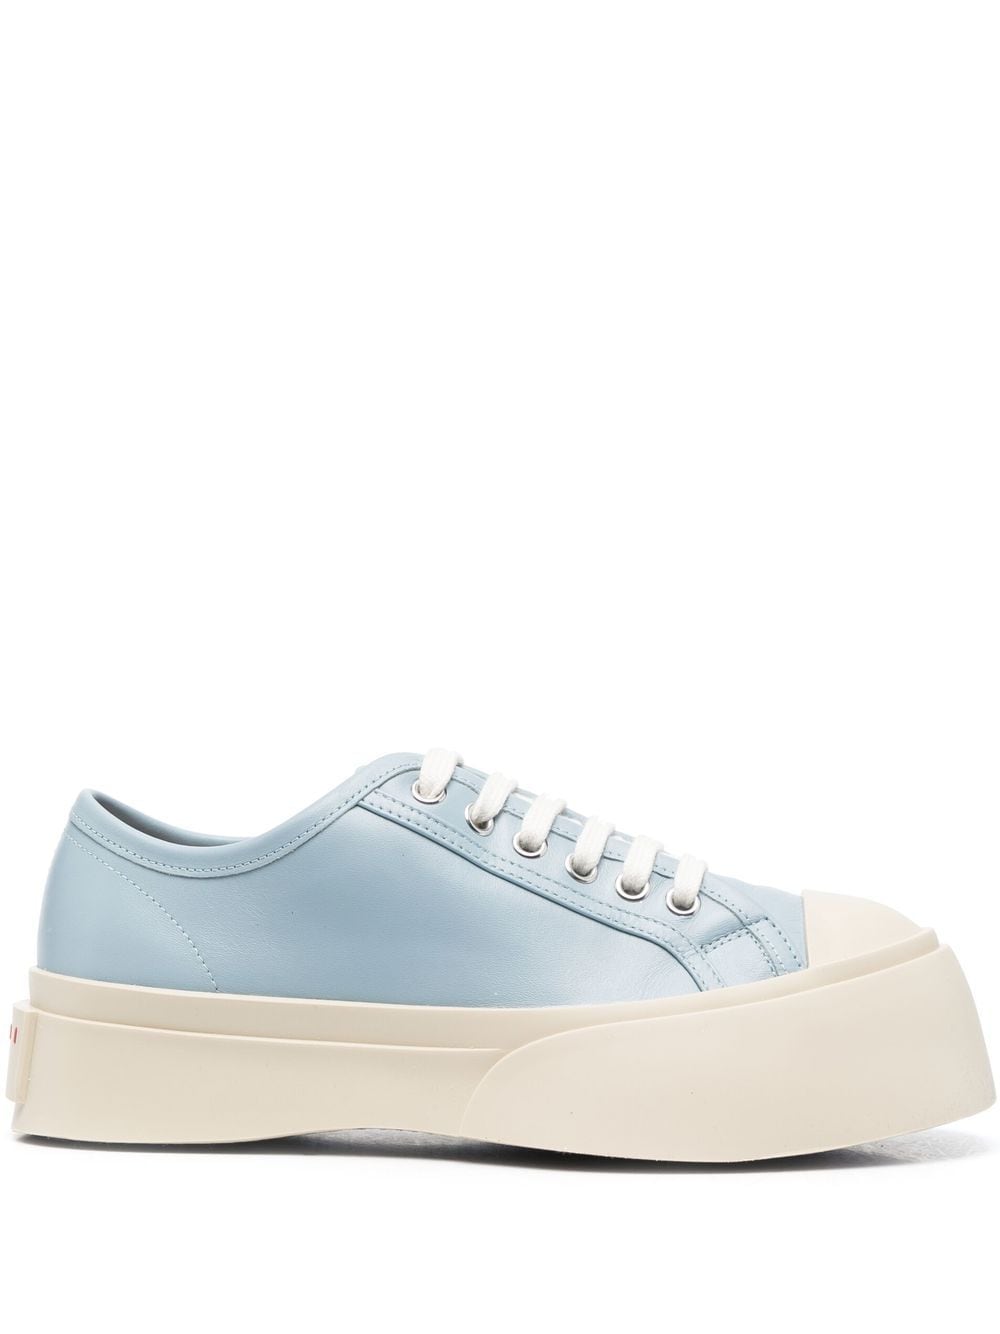 Marni 20mm Pablo Leather Sneakers In Blue